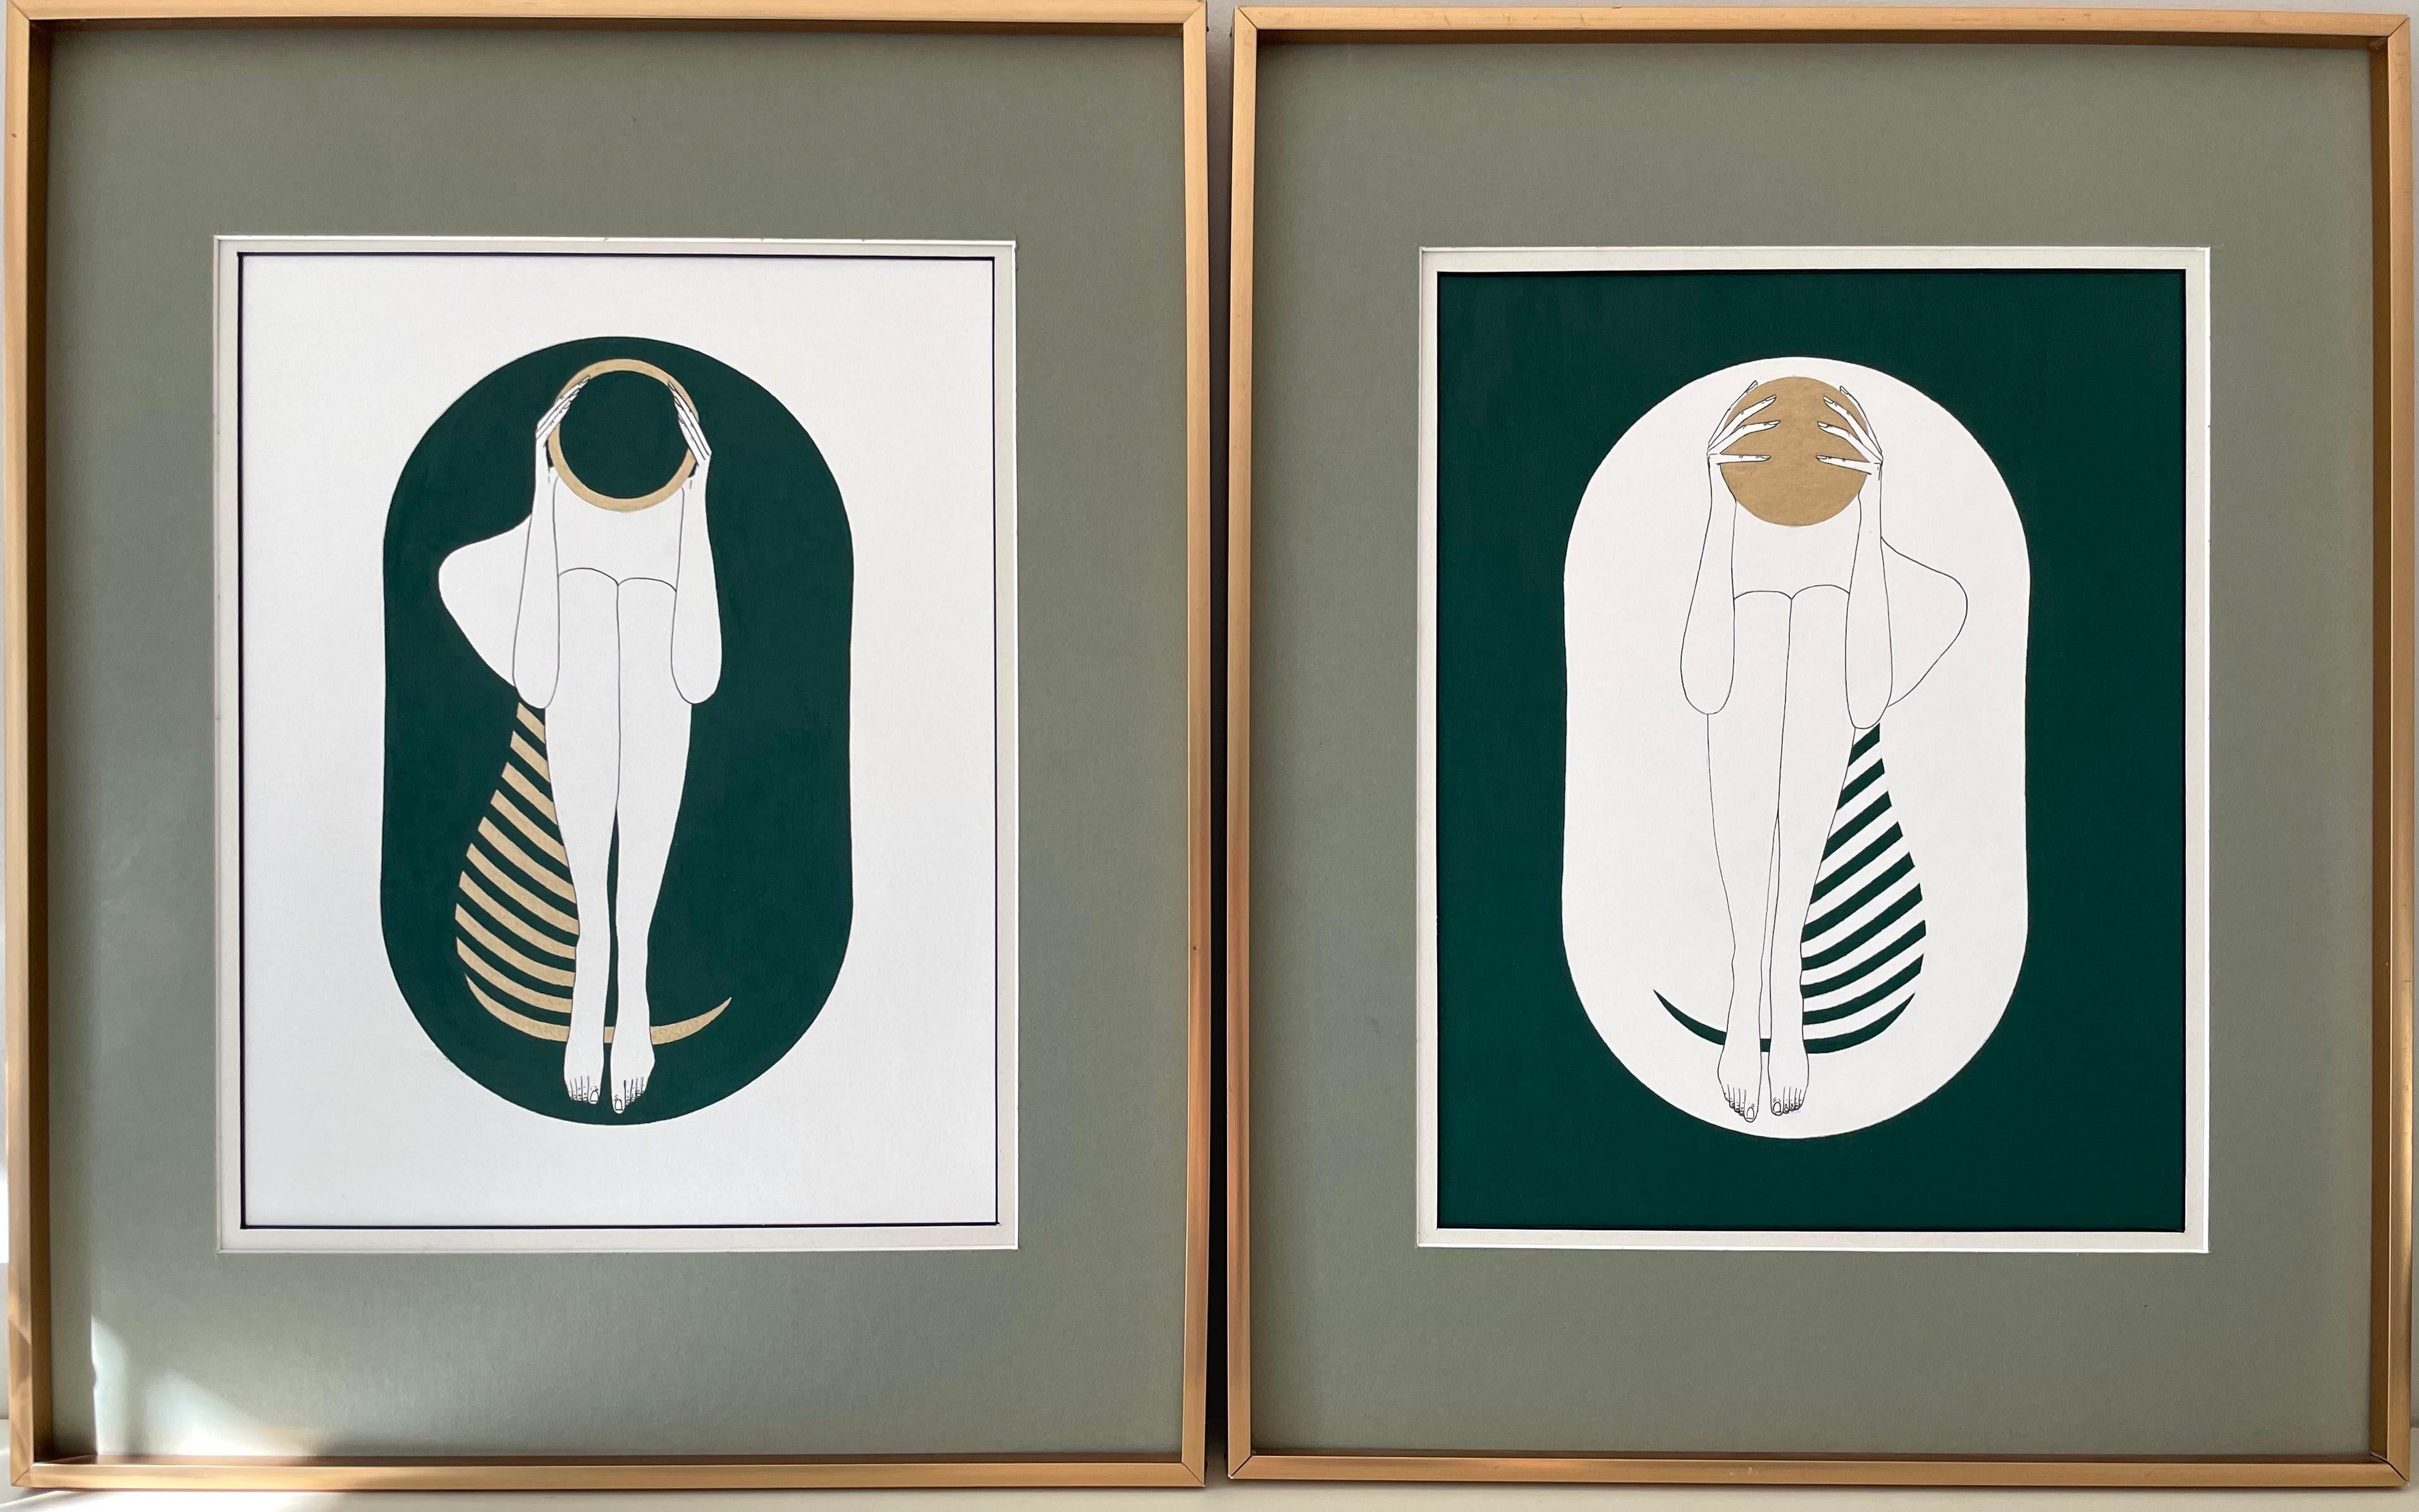 Green and white capsule - line drawing figure with gold disk and stripes